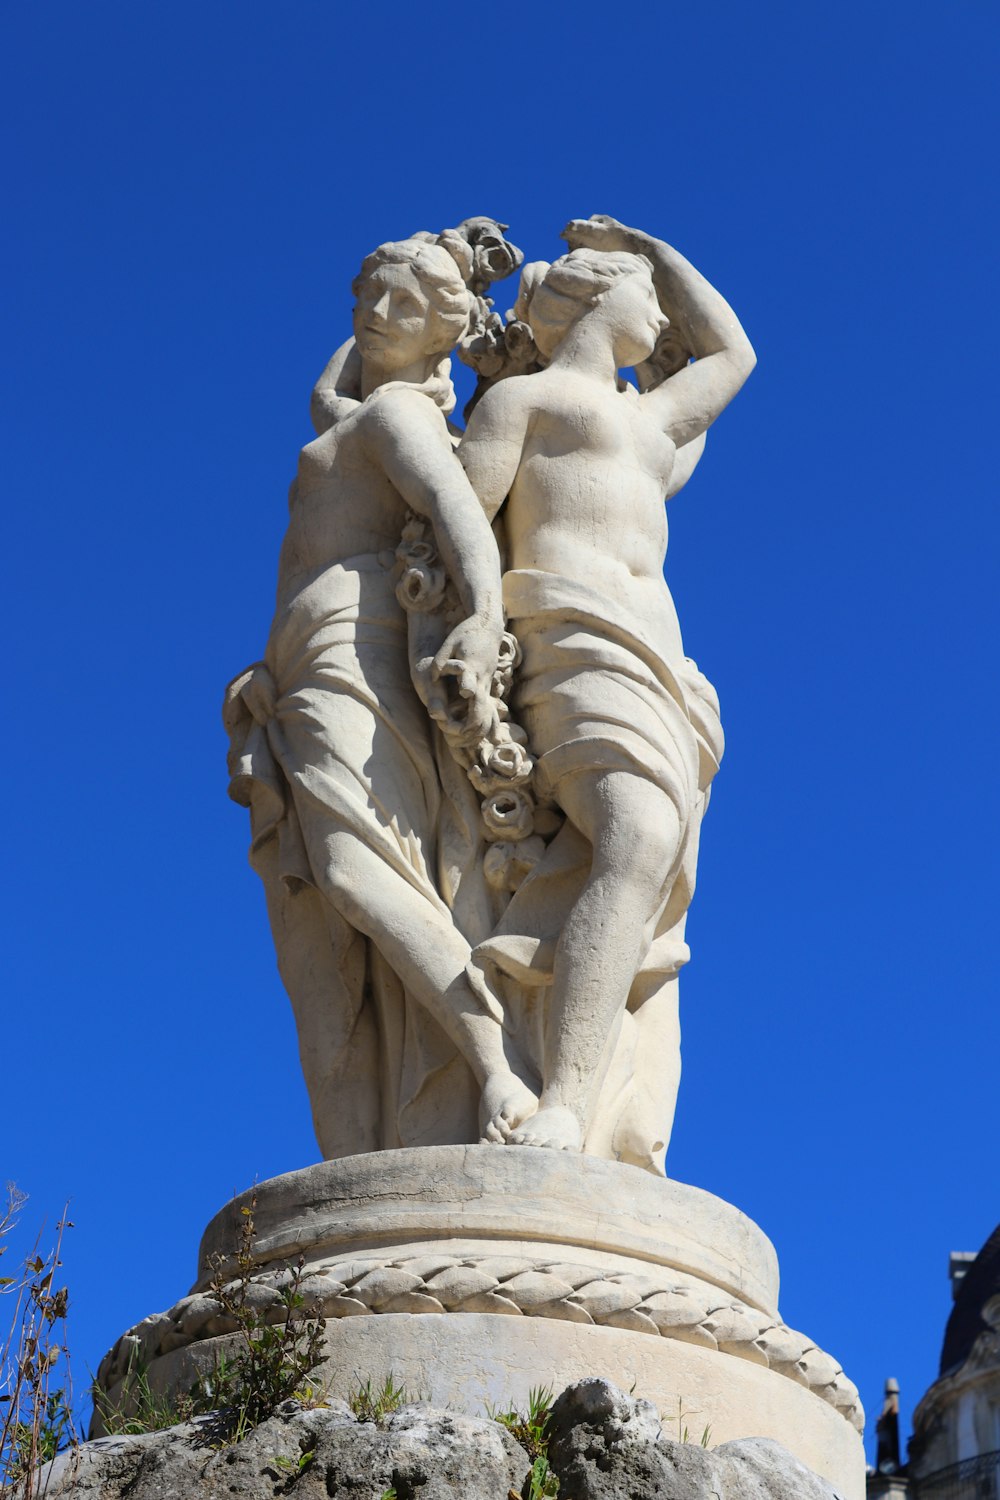 a statue of two women holding each other